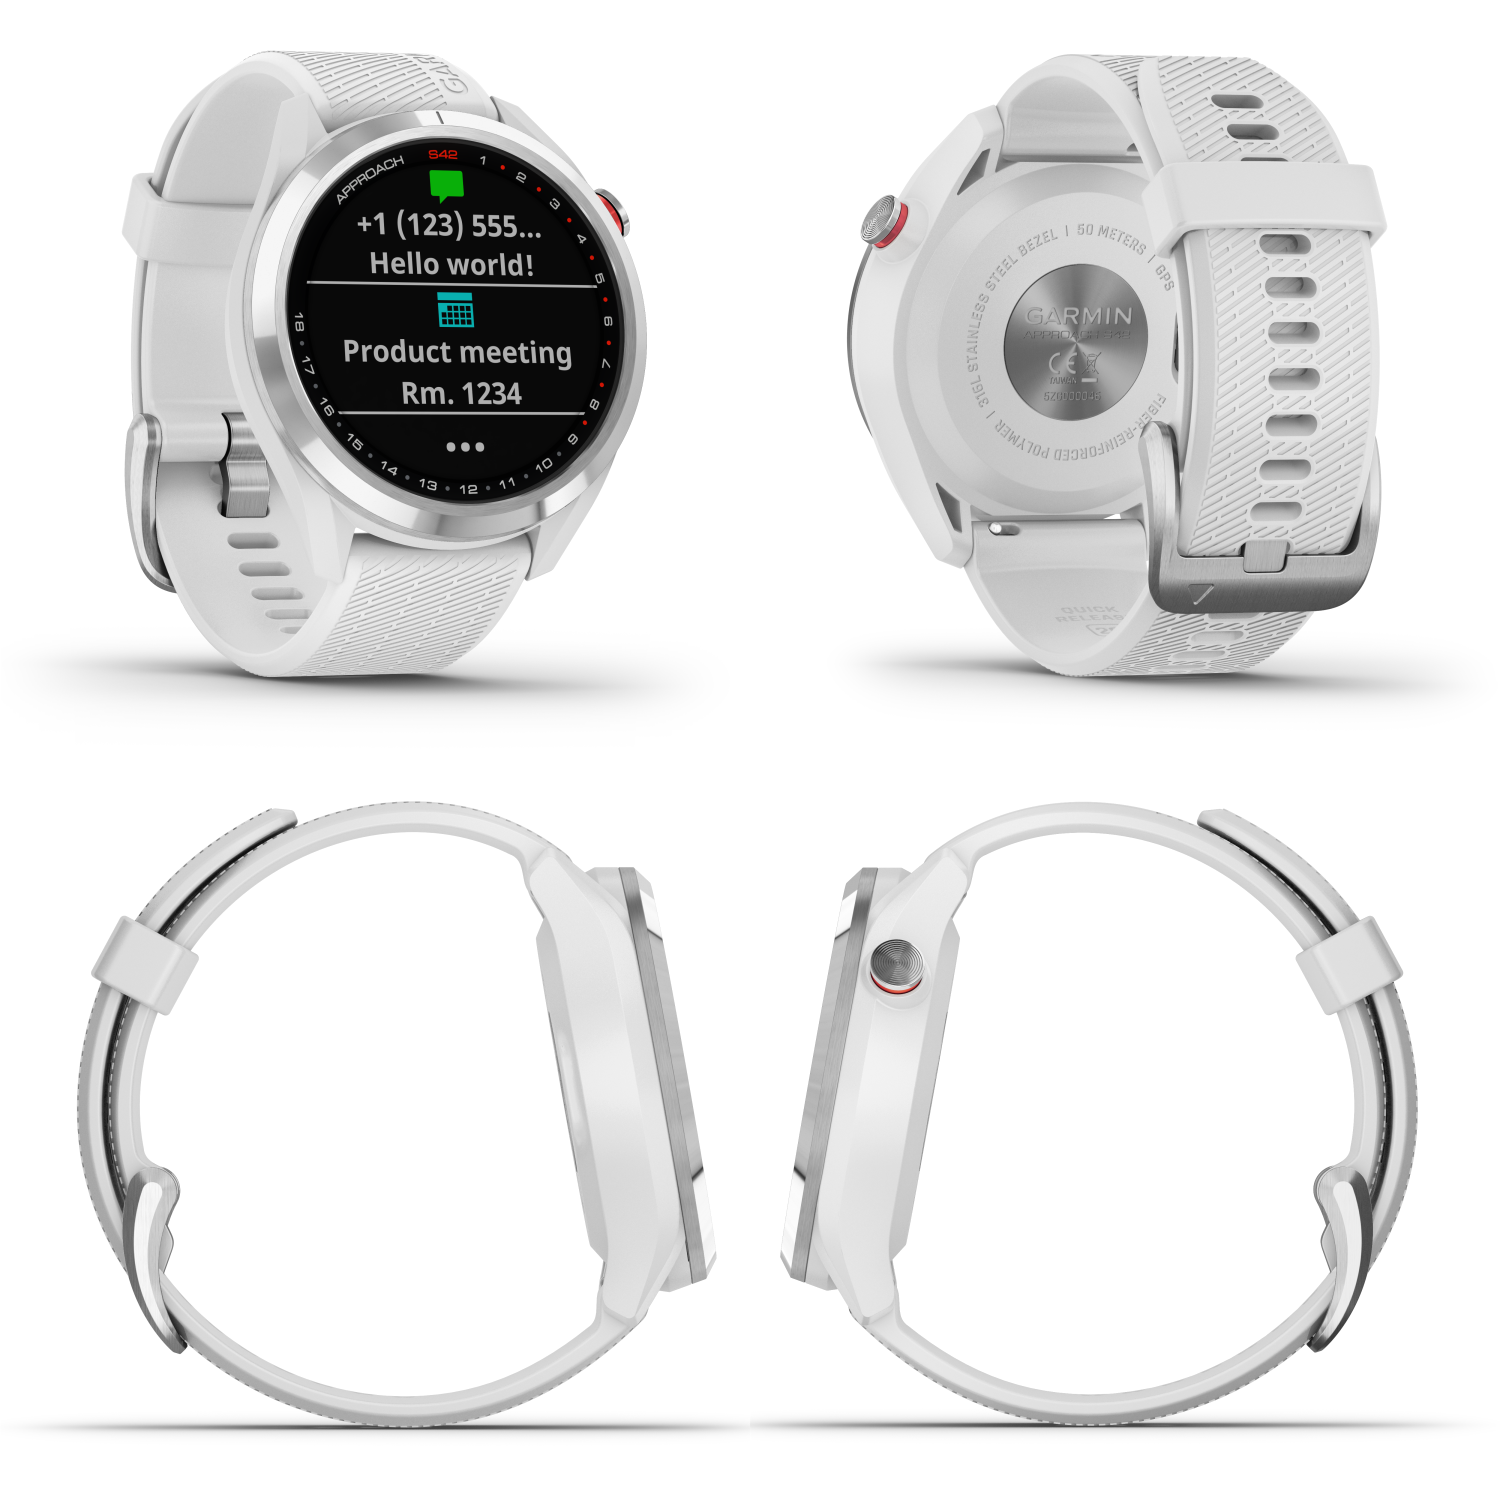 Garmin Approach S42 Stainless Steel with White - image 4 of 8